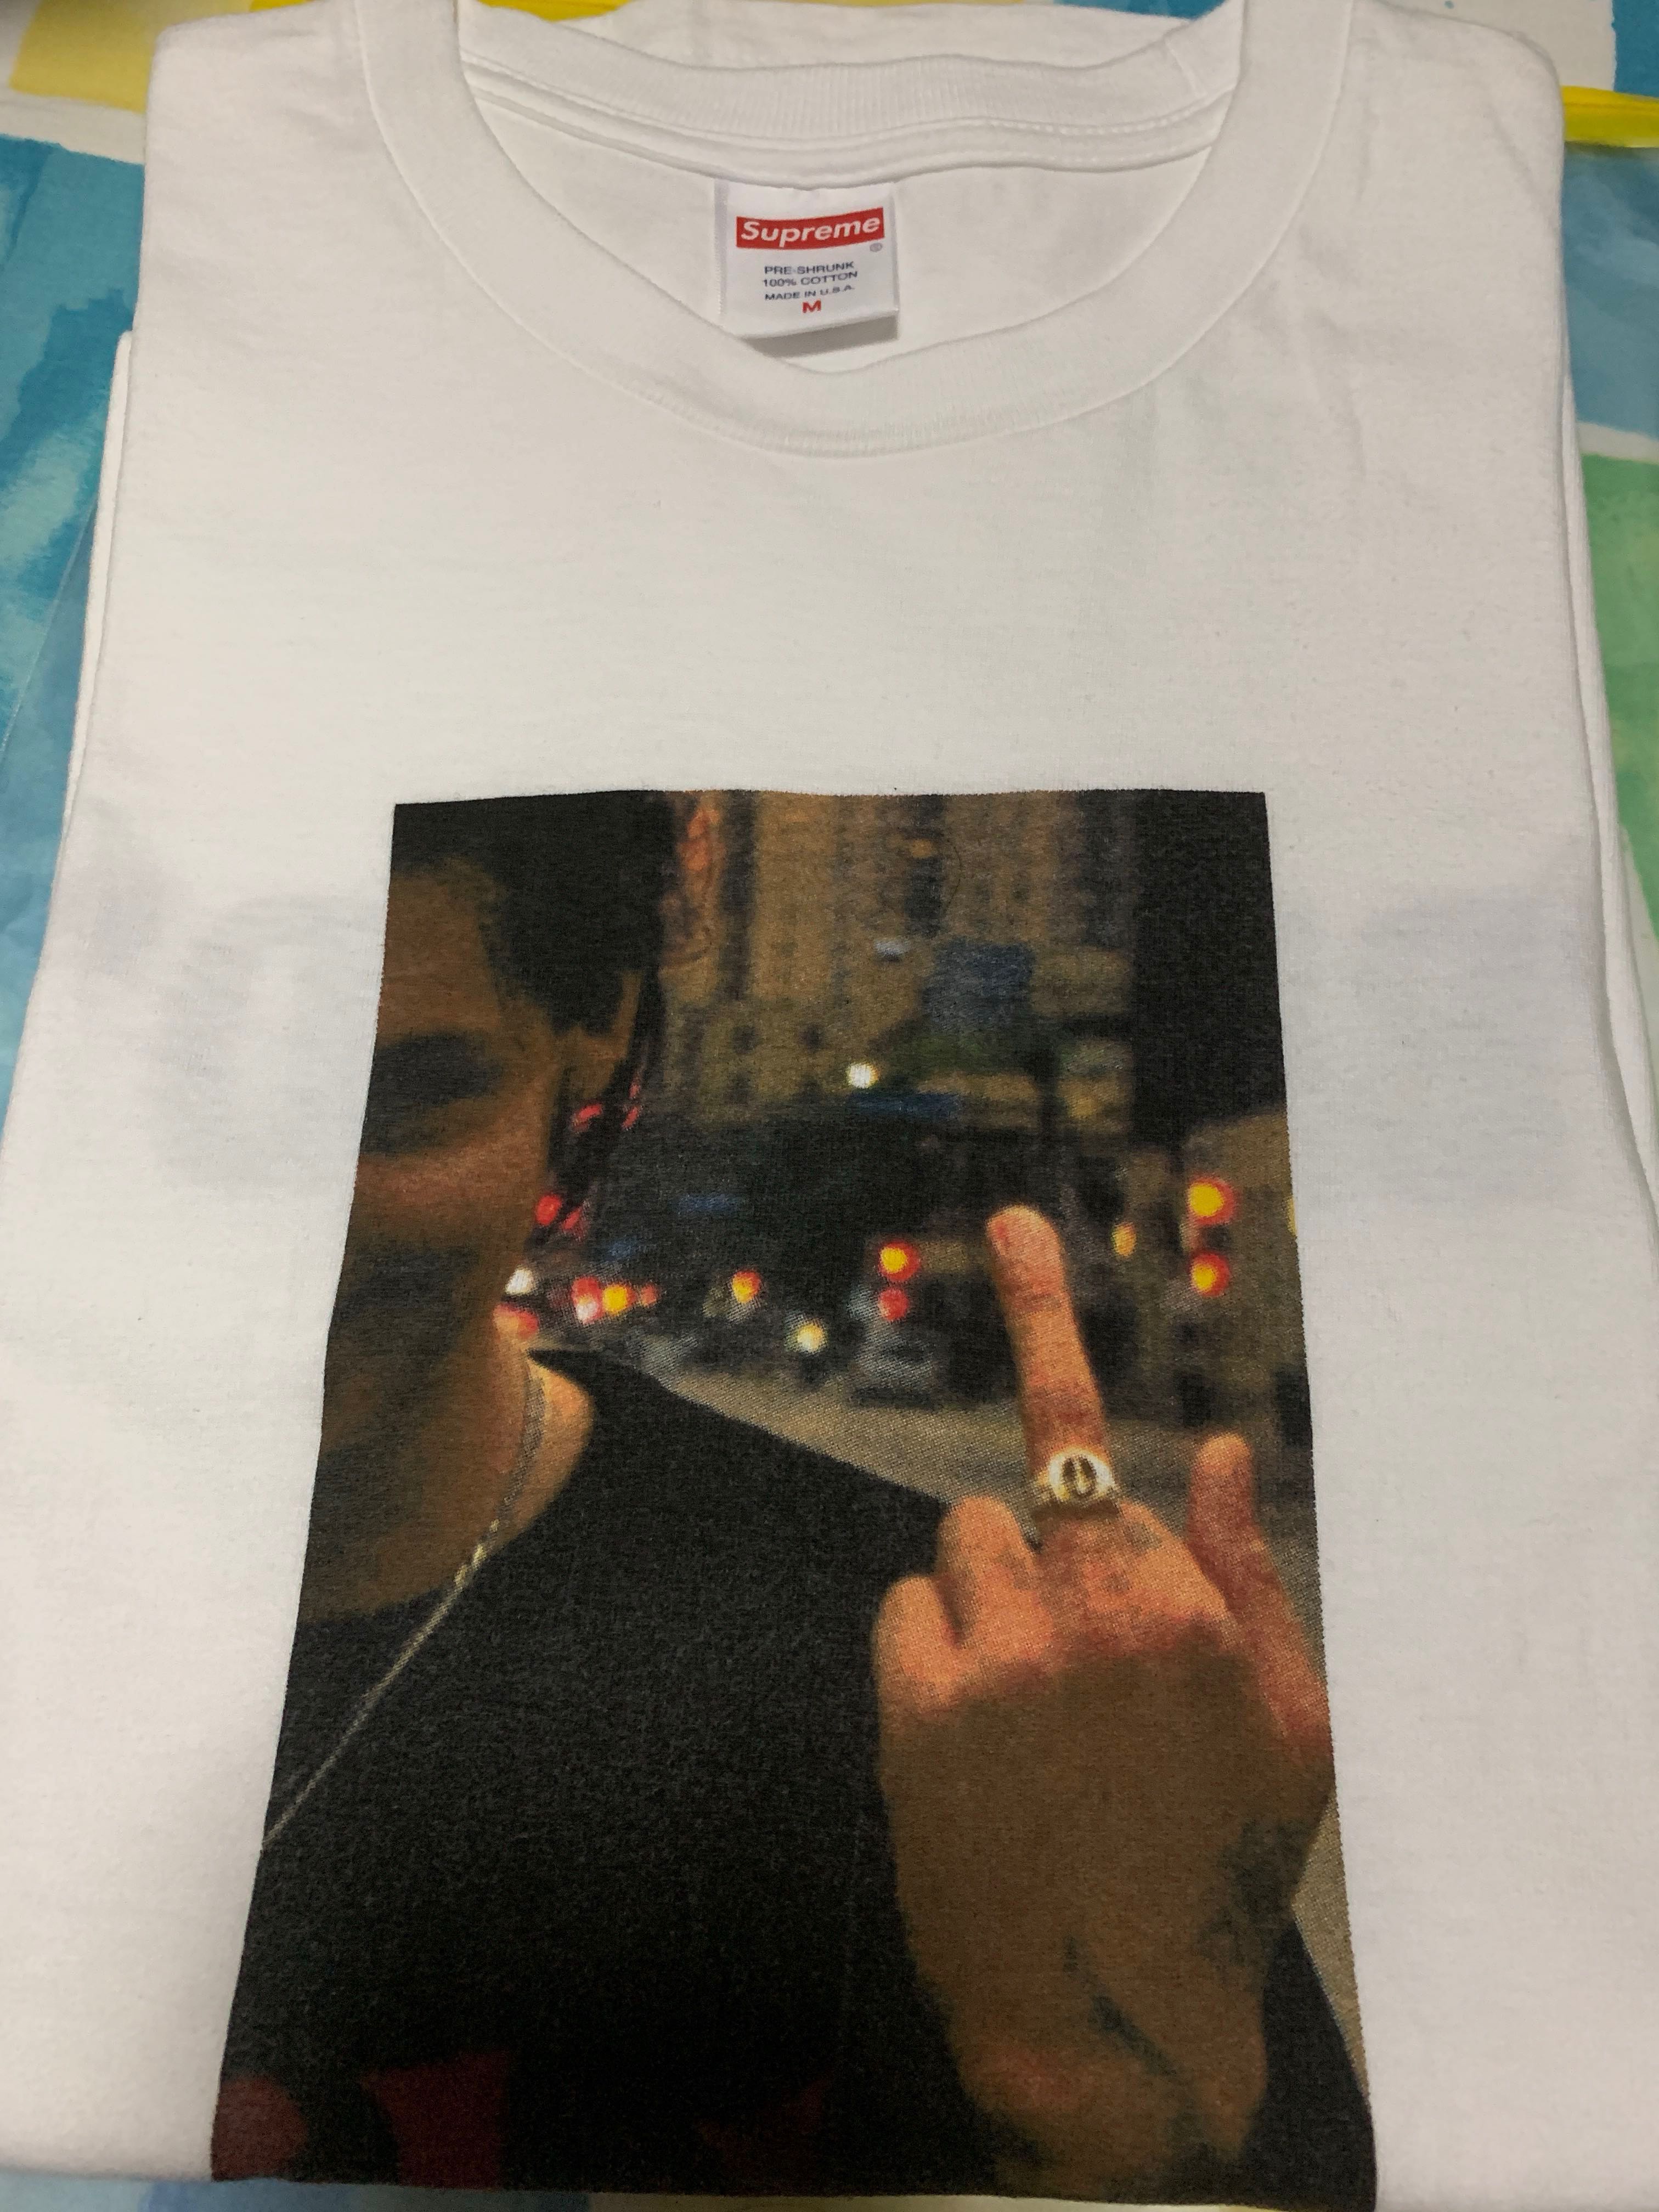 Supreme BLESSED Tee + DVD